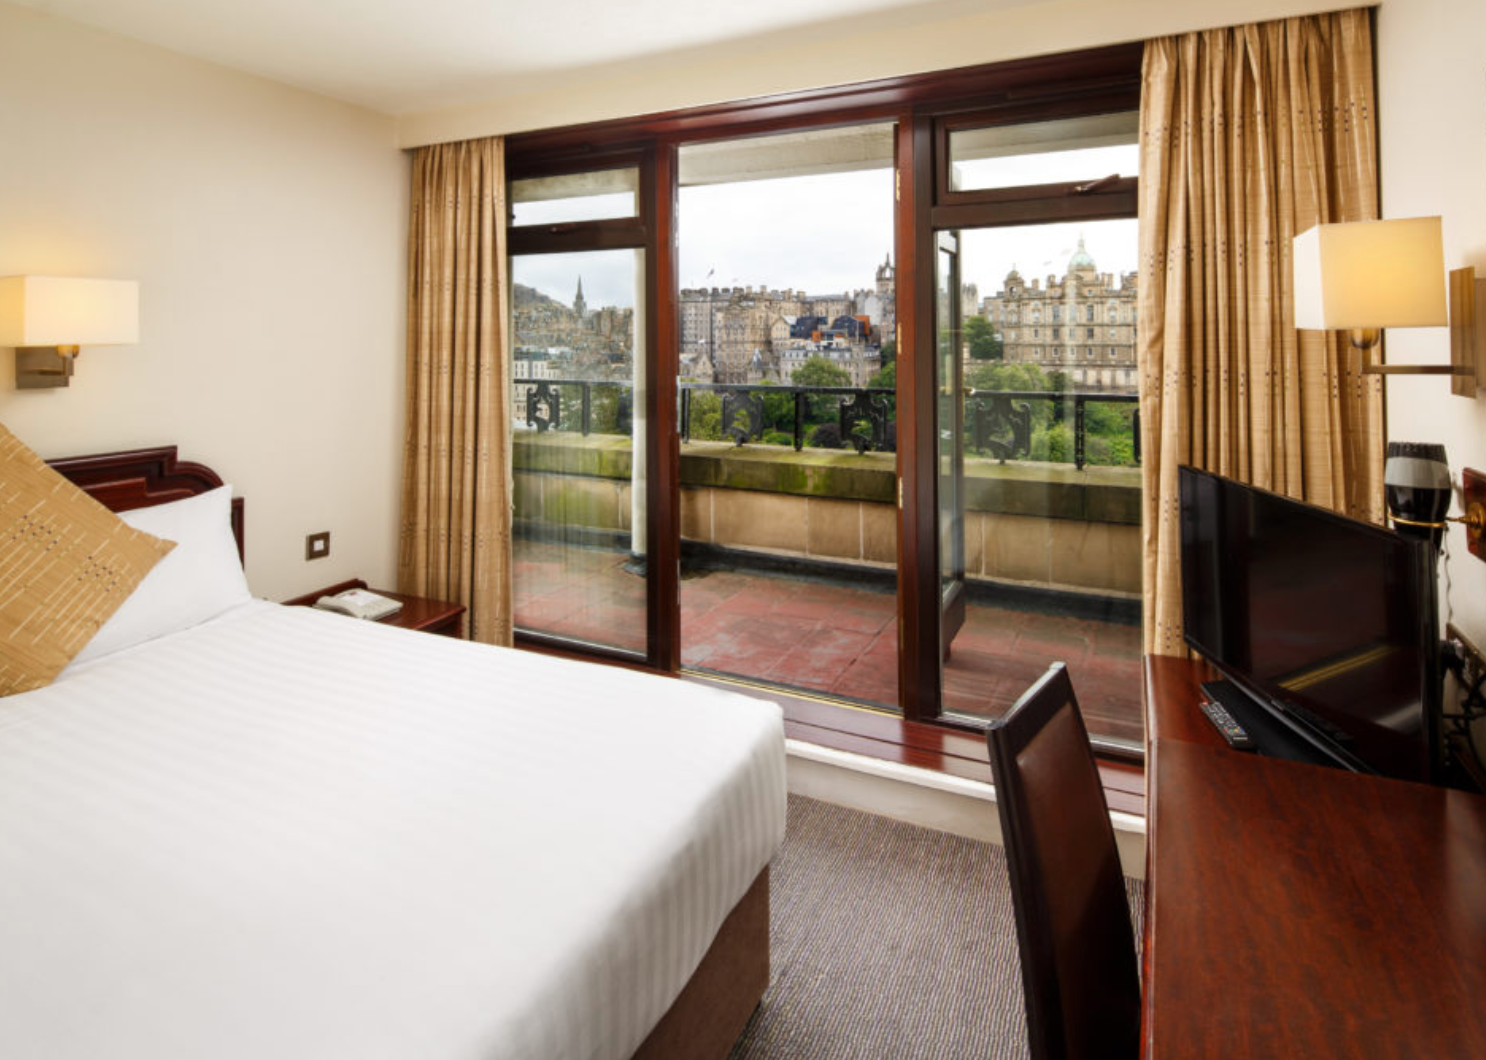 Room at the inn: the Edinburgh Mercure Princes Street is now open to all UK residents